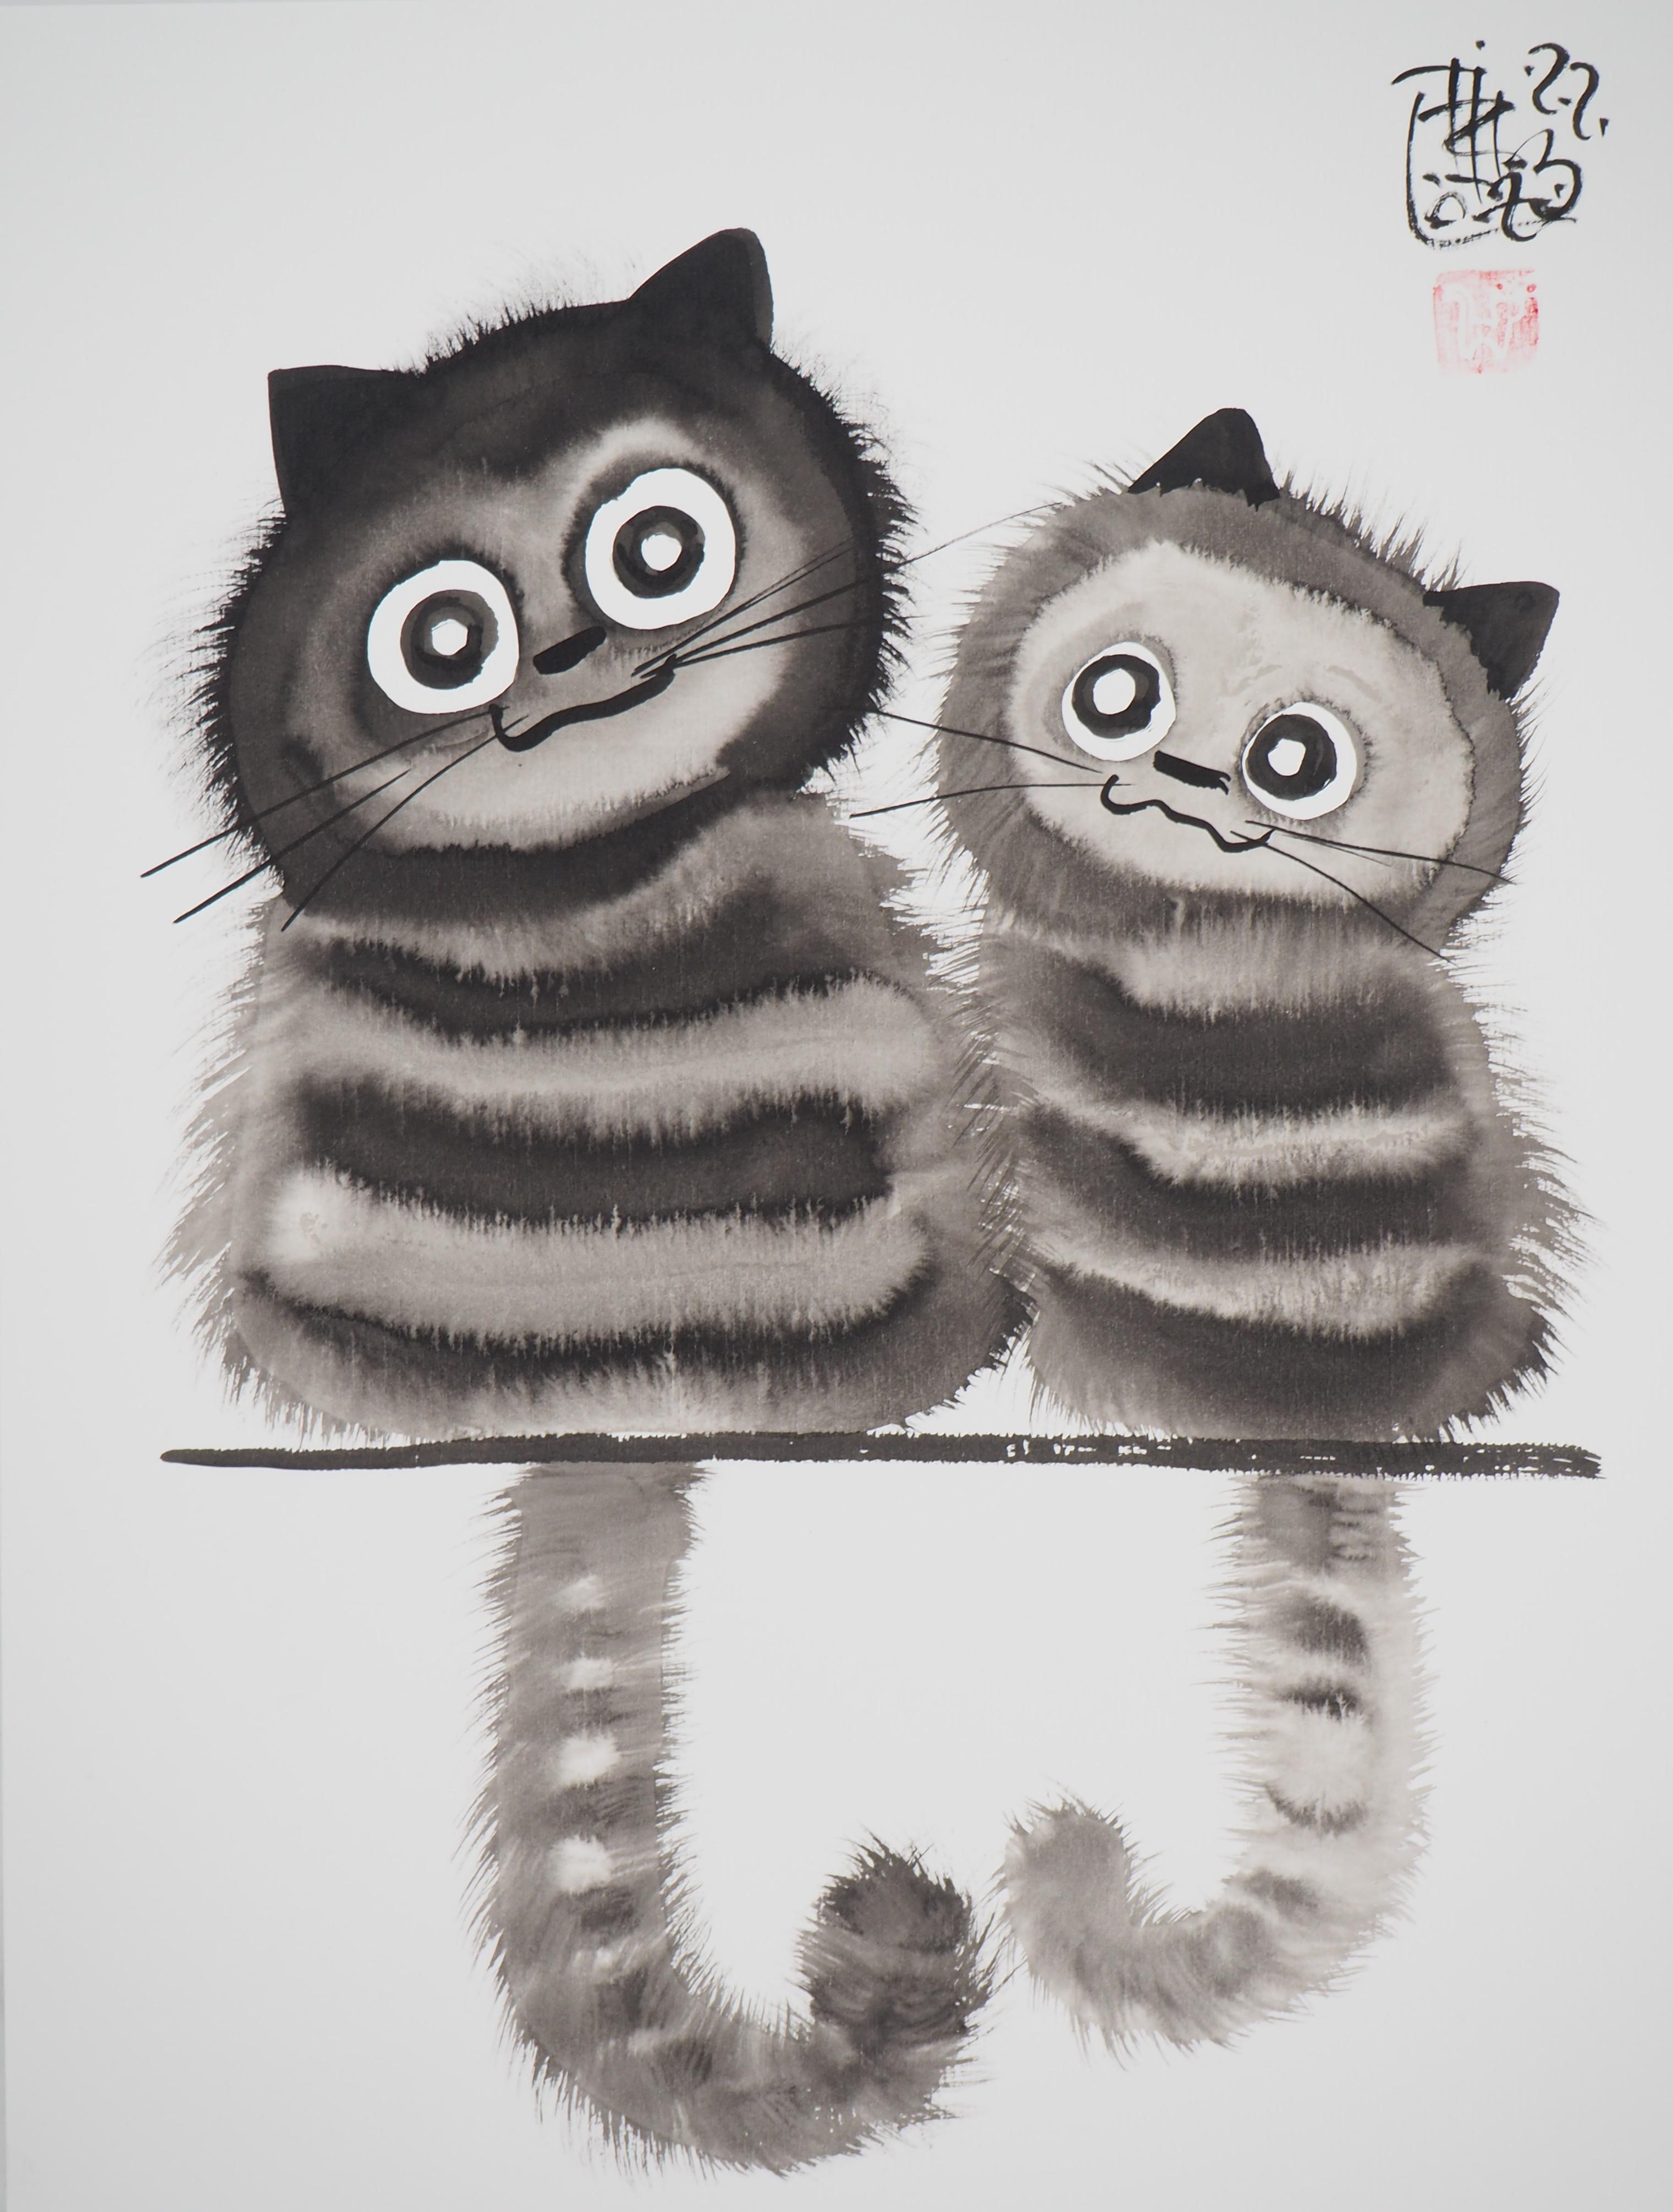 Cute Baby Cats - Handsigned Original Ink Drawing  - Art by Laszlo Tibay